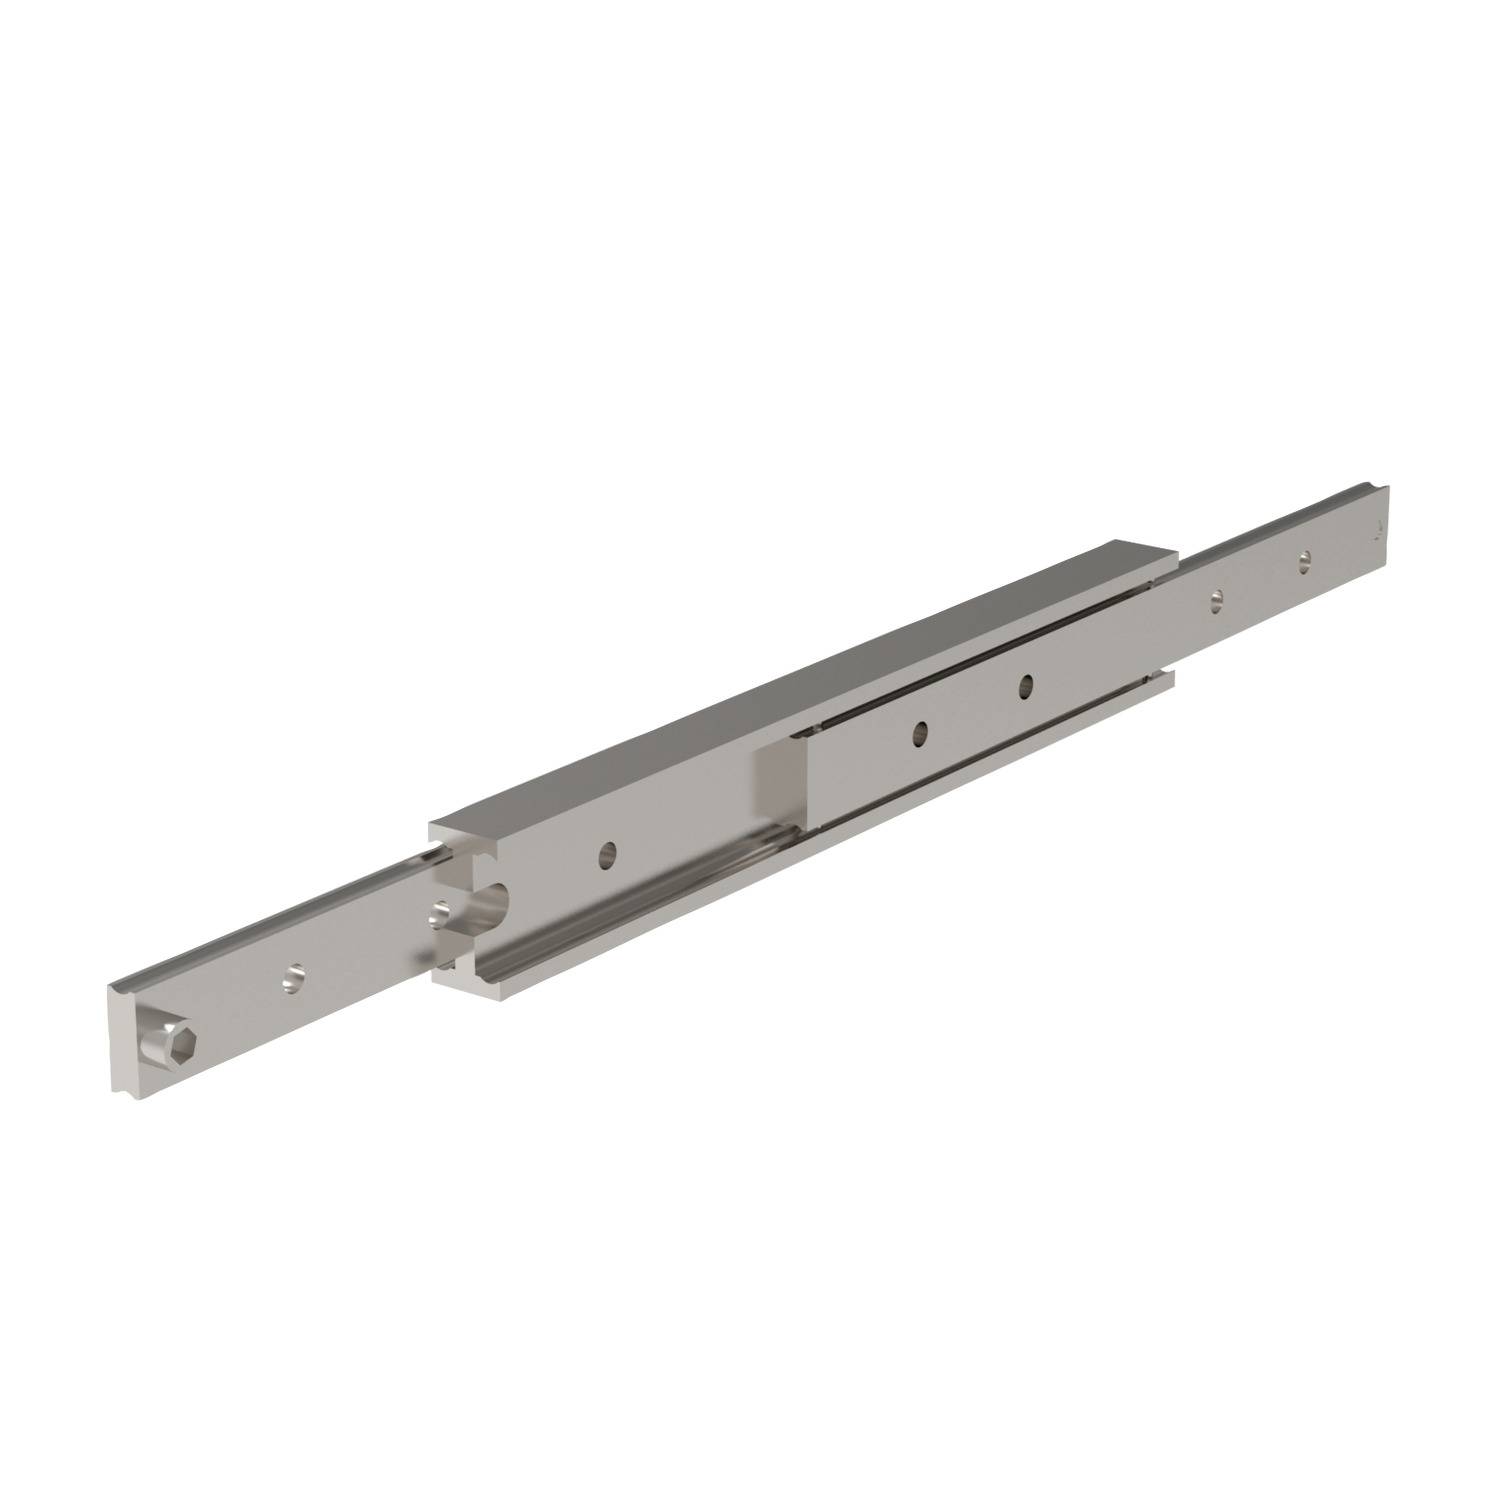 L2054.0400 Stainless AISI 316 slide l 400 size 70 Stainless steel (A4,AISI 316) -rail , balls & cage